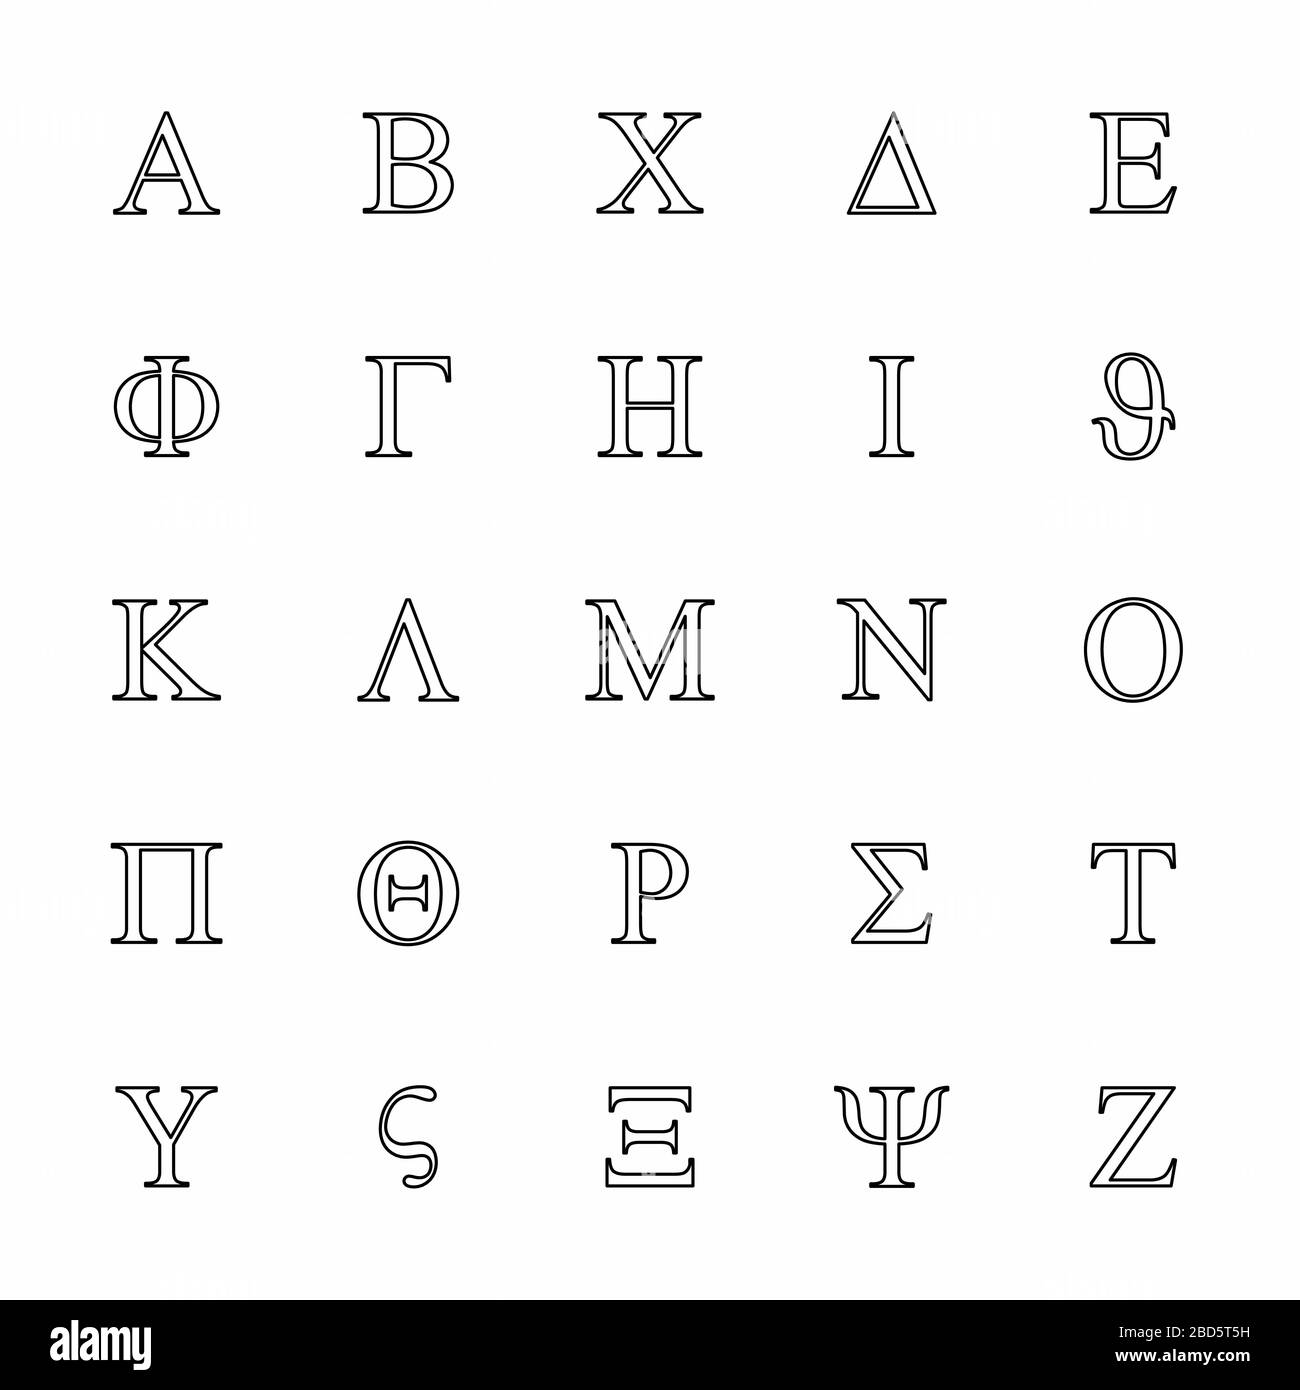 Greek letters icons set Stock Vector